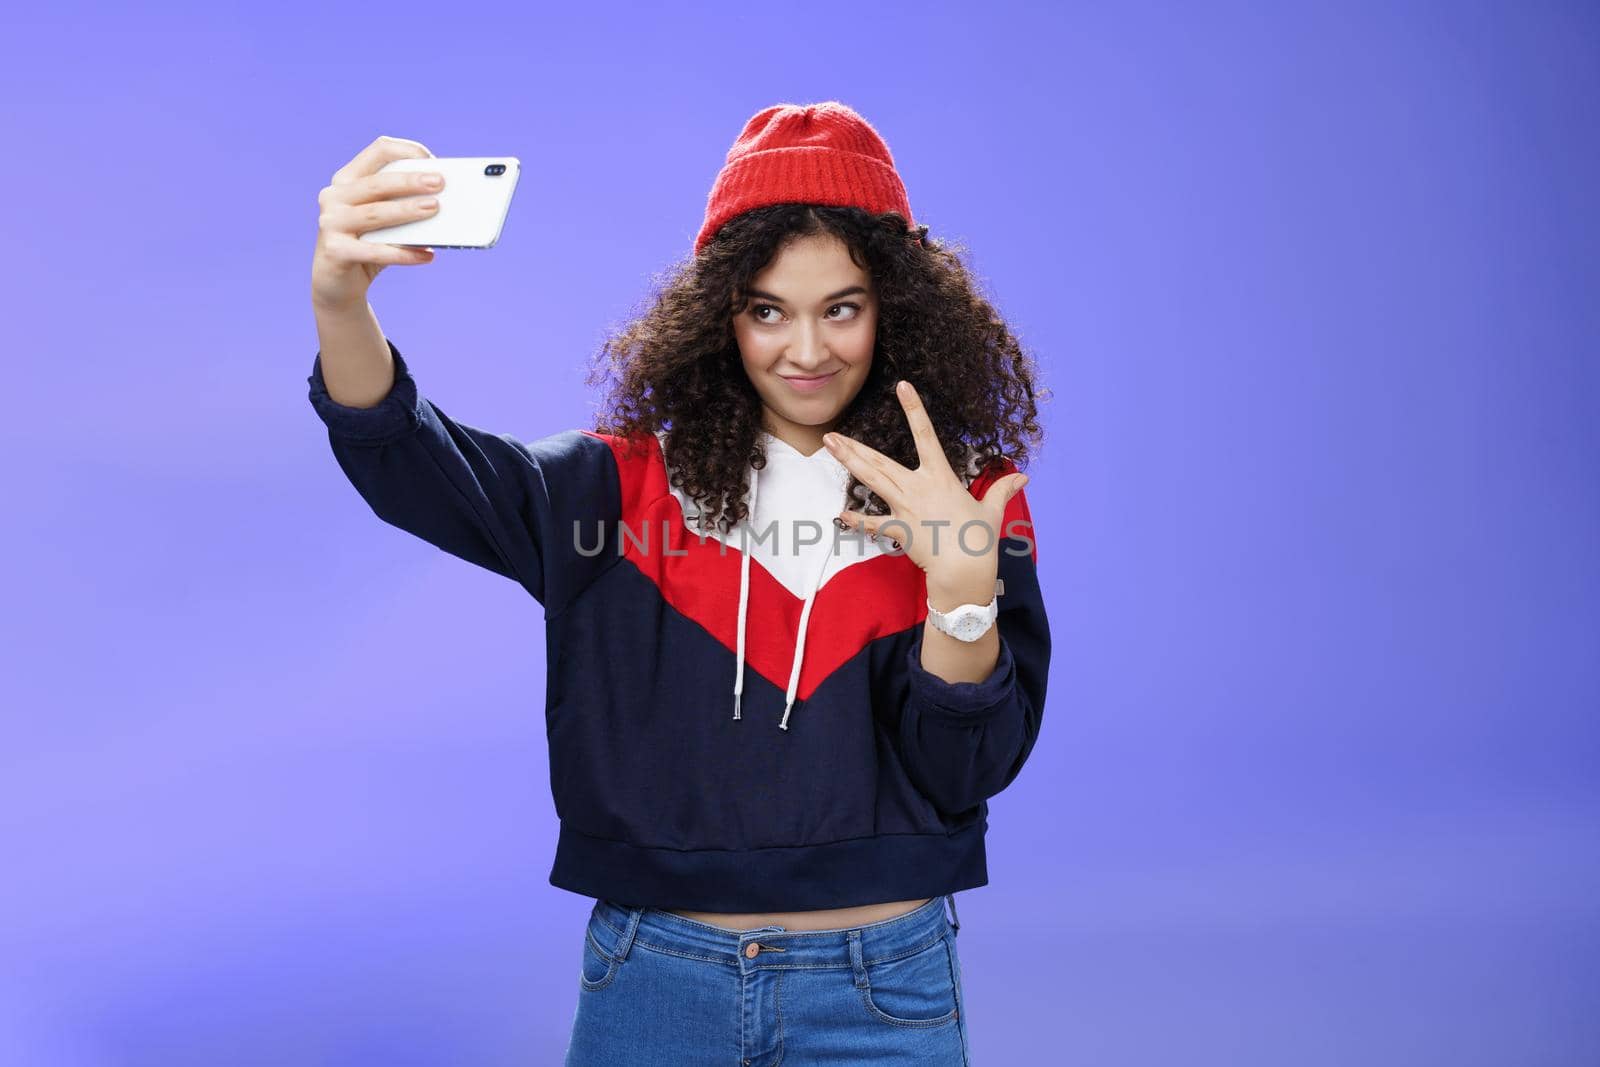 Cool and stylish good-looking caucasian female with curly hair in trendy red beanie and sweatshirt looking from under forehead awesome and swah taking selfie with smartphone holded in extended arm.